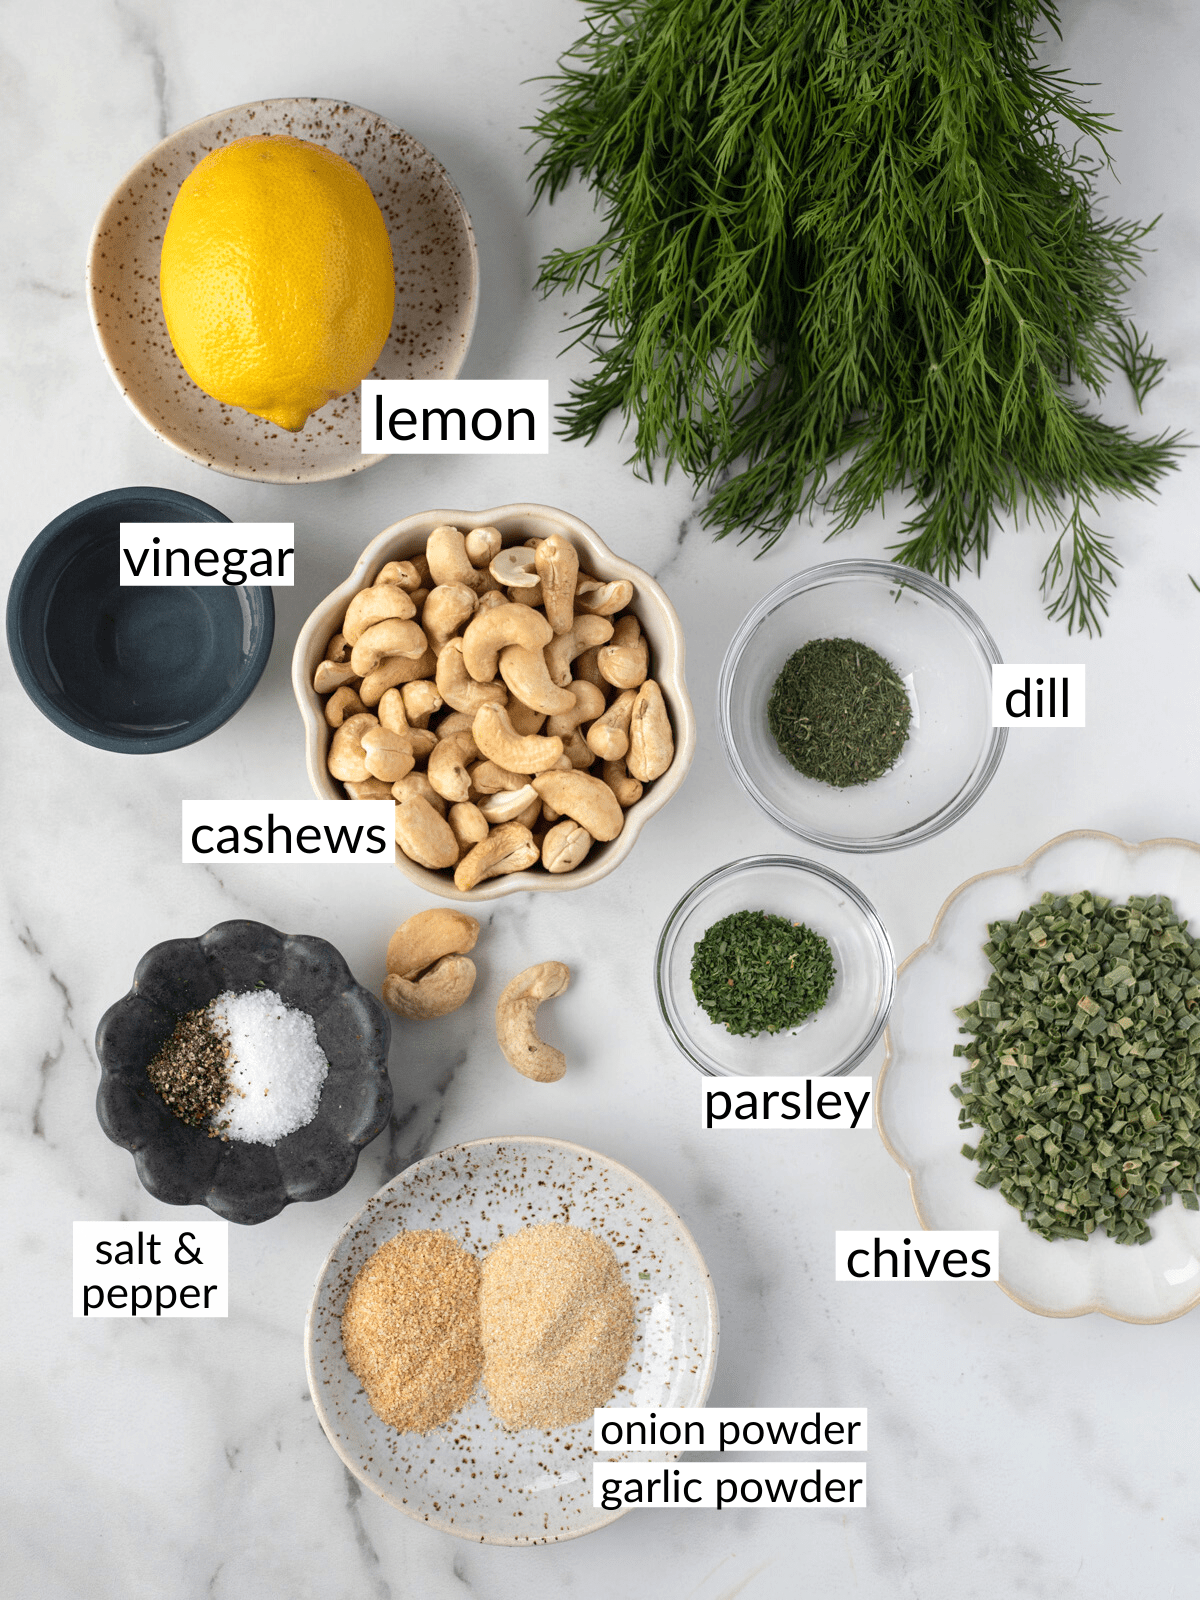 Ingredients for vegan ranch dressing in bowls on a white countertop including fresh dill and cashews.